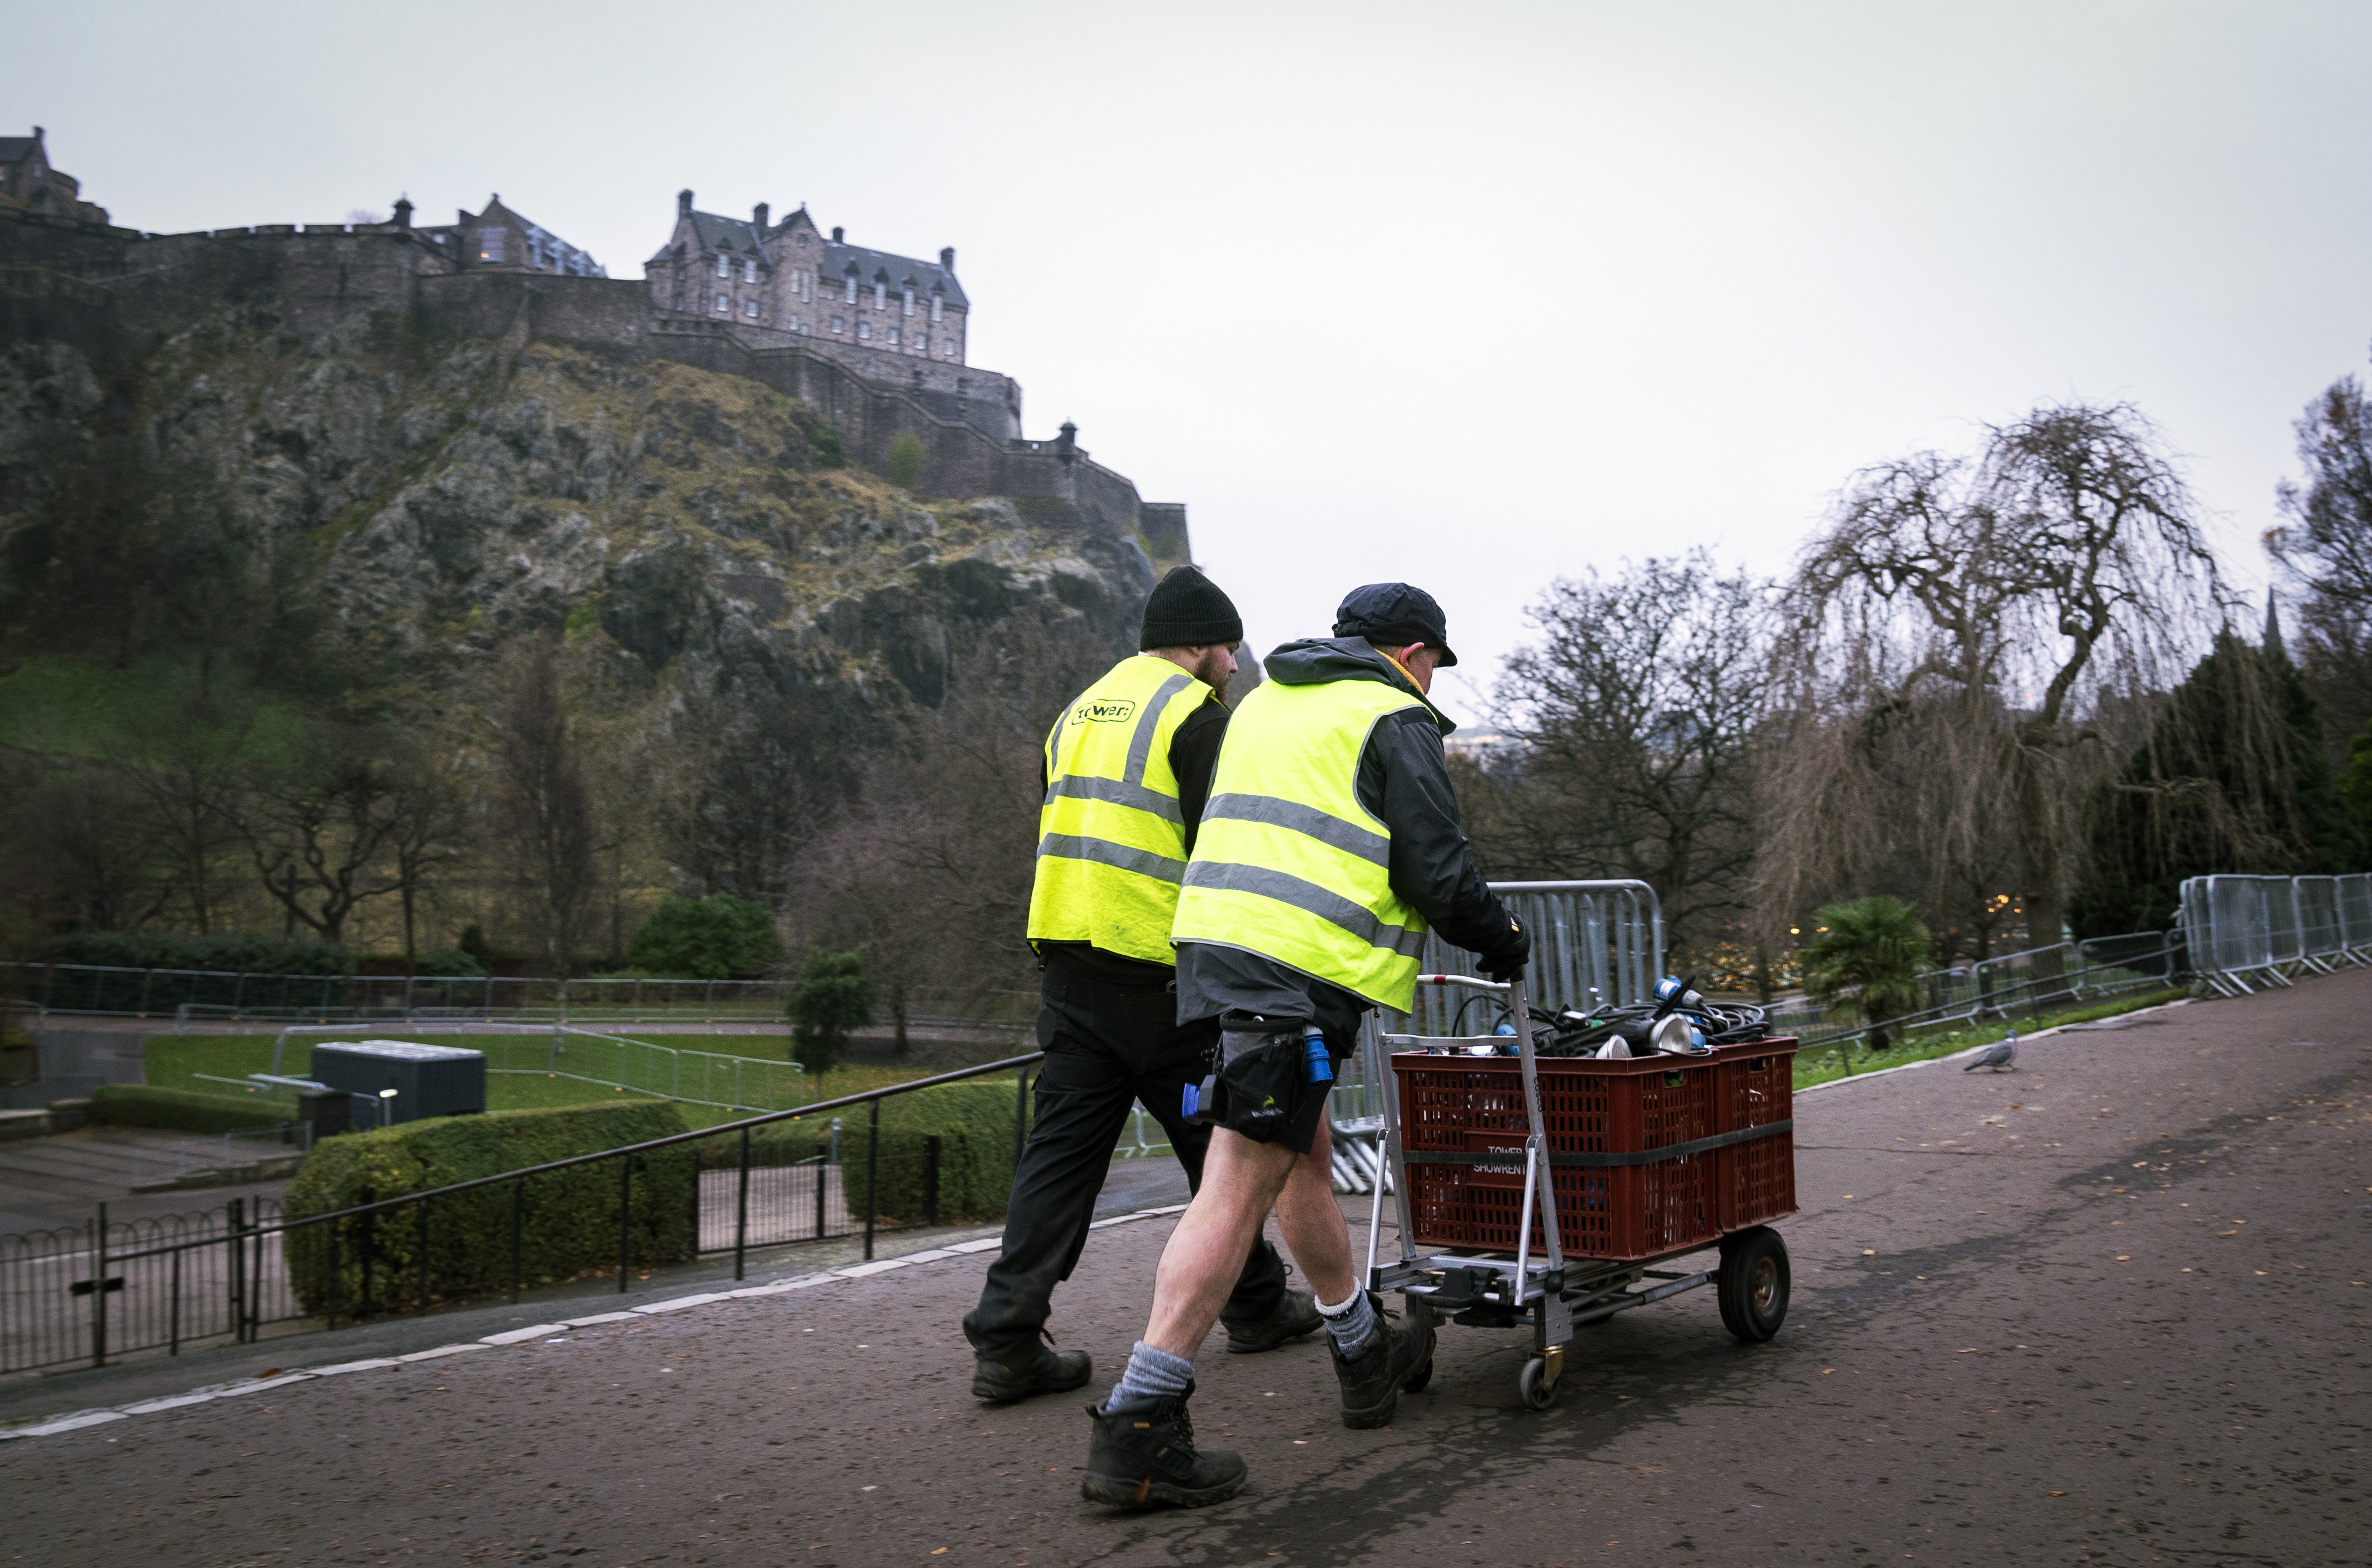 Scottish Government Covid restrictions have resulted in the cancellation of Edinburgh’s Hogmanay celebrations (Jane Barlow/PA)